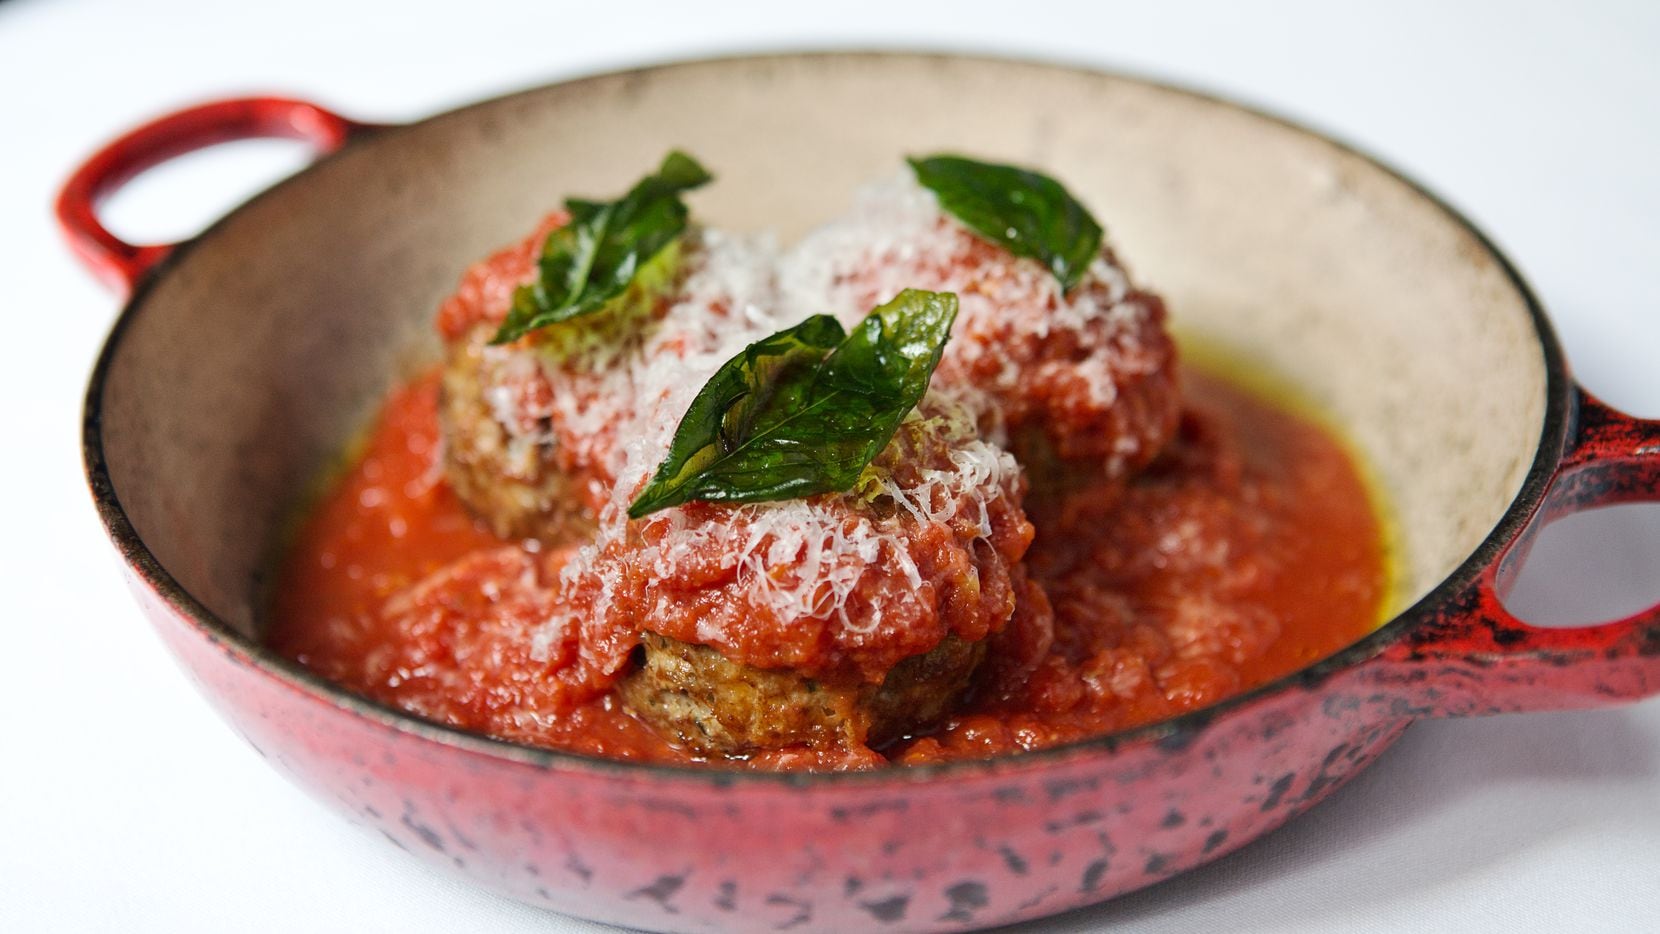 Carbone's meatballs are one of the most popular items at the restaurant. Carbone originated...